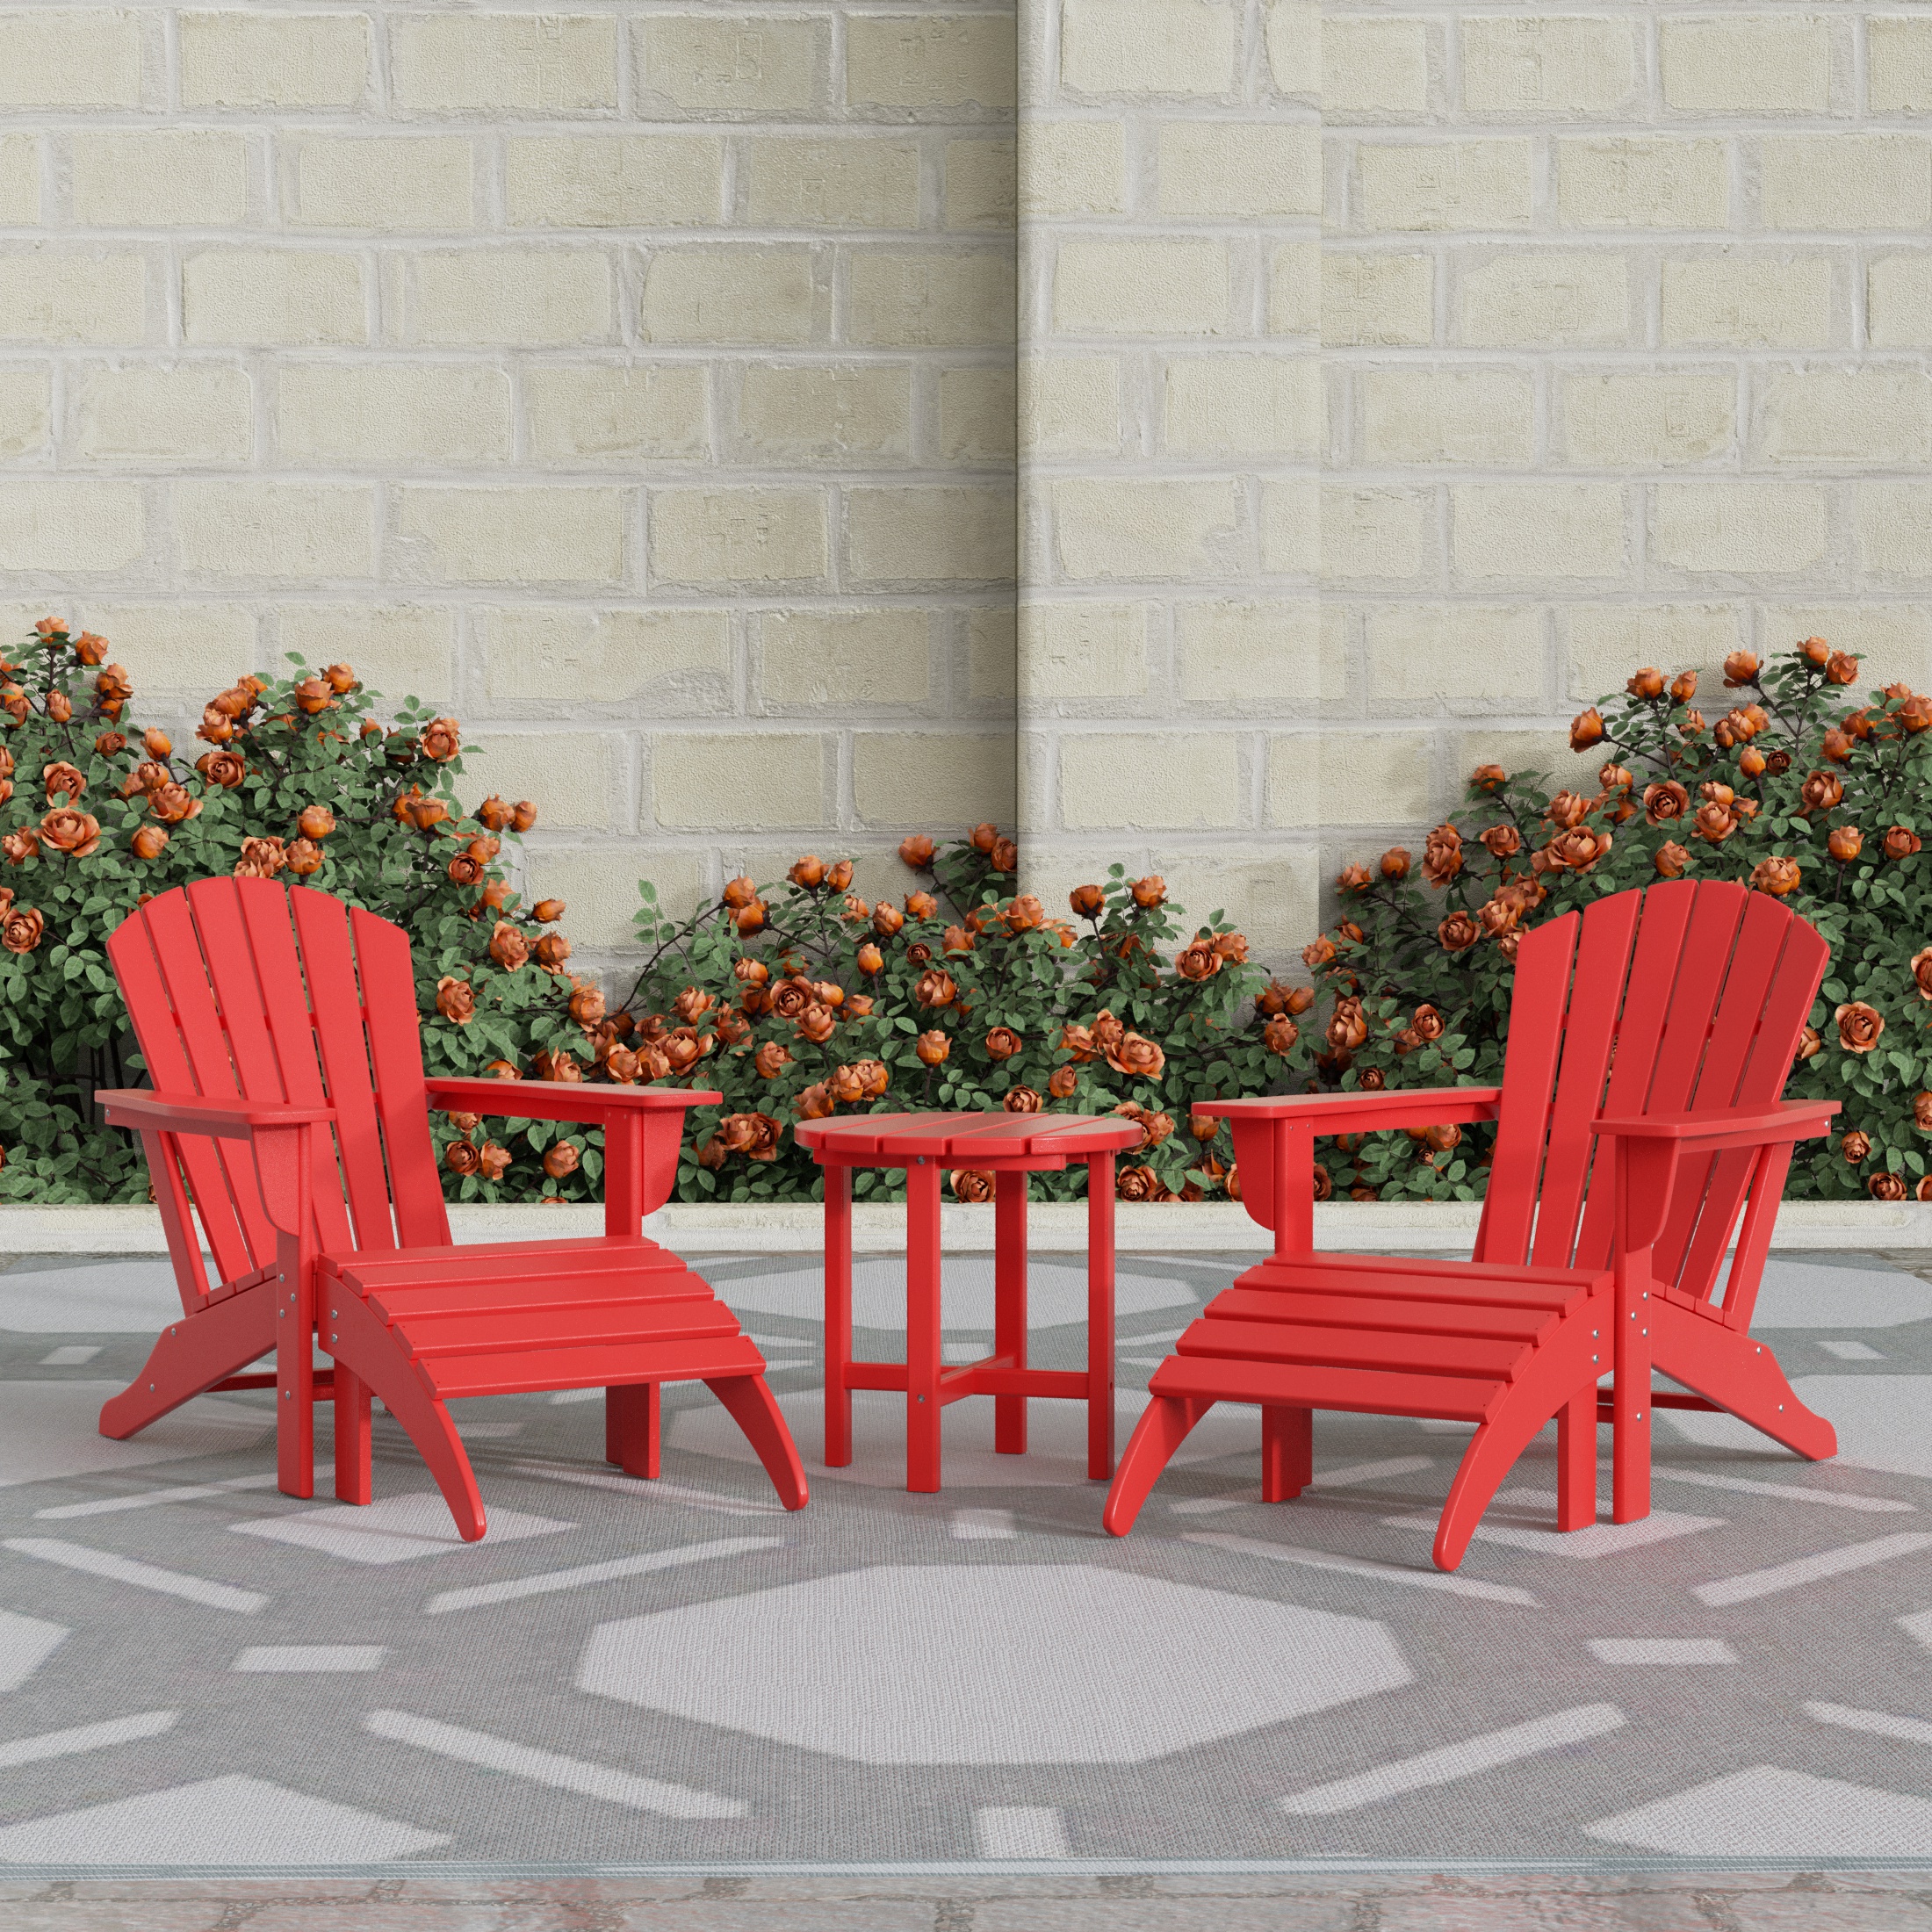 WestinTrends Dylan Outdoor Lounge Chairs Set of 2, 5 Pieces Seashell Adirondack Chairs with Ottoman and Side Table, All Weather Poly Lumber Outdoor Patio Chairs Furniture Set, Red - image 2 of 9